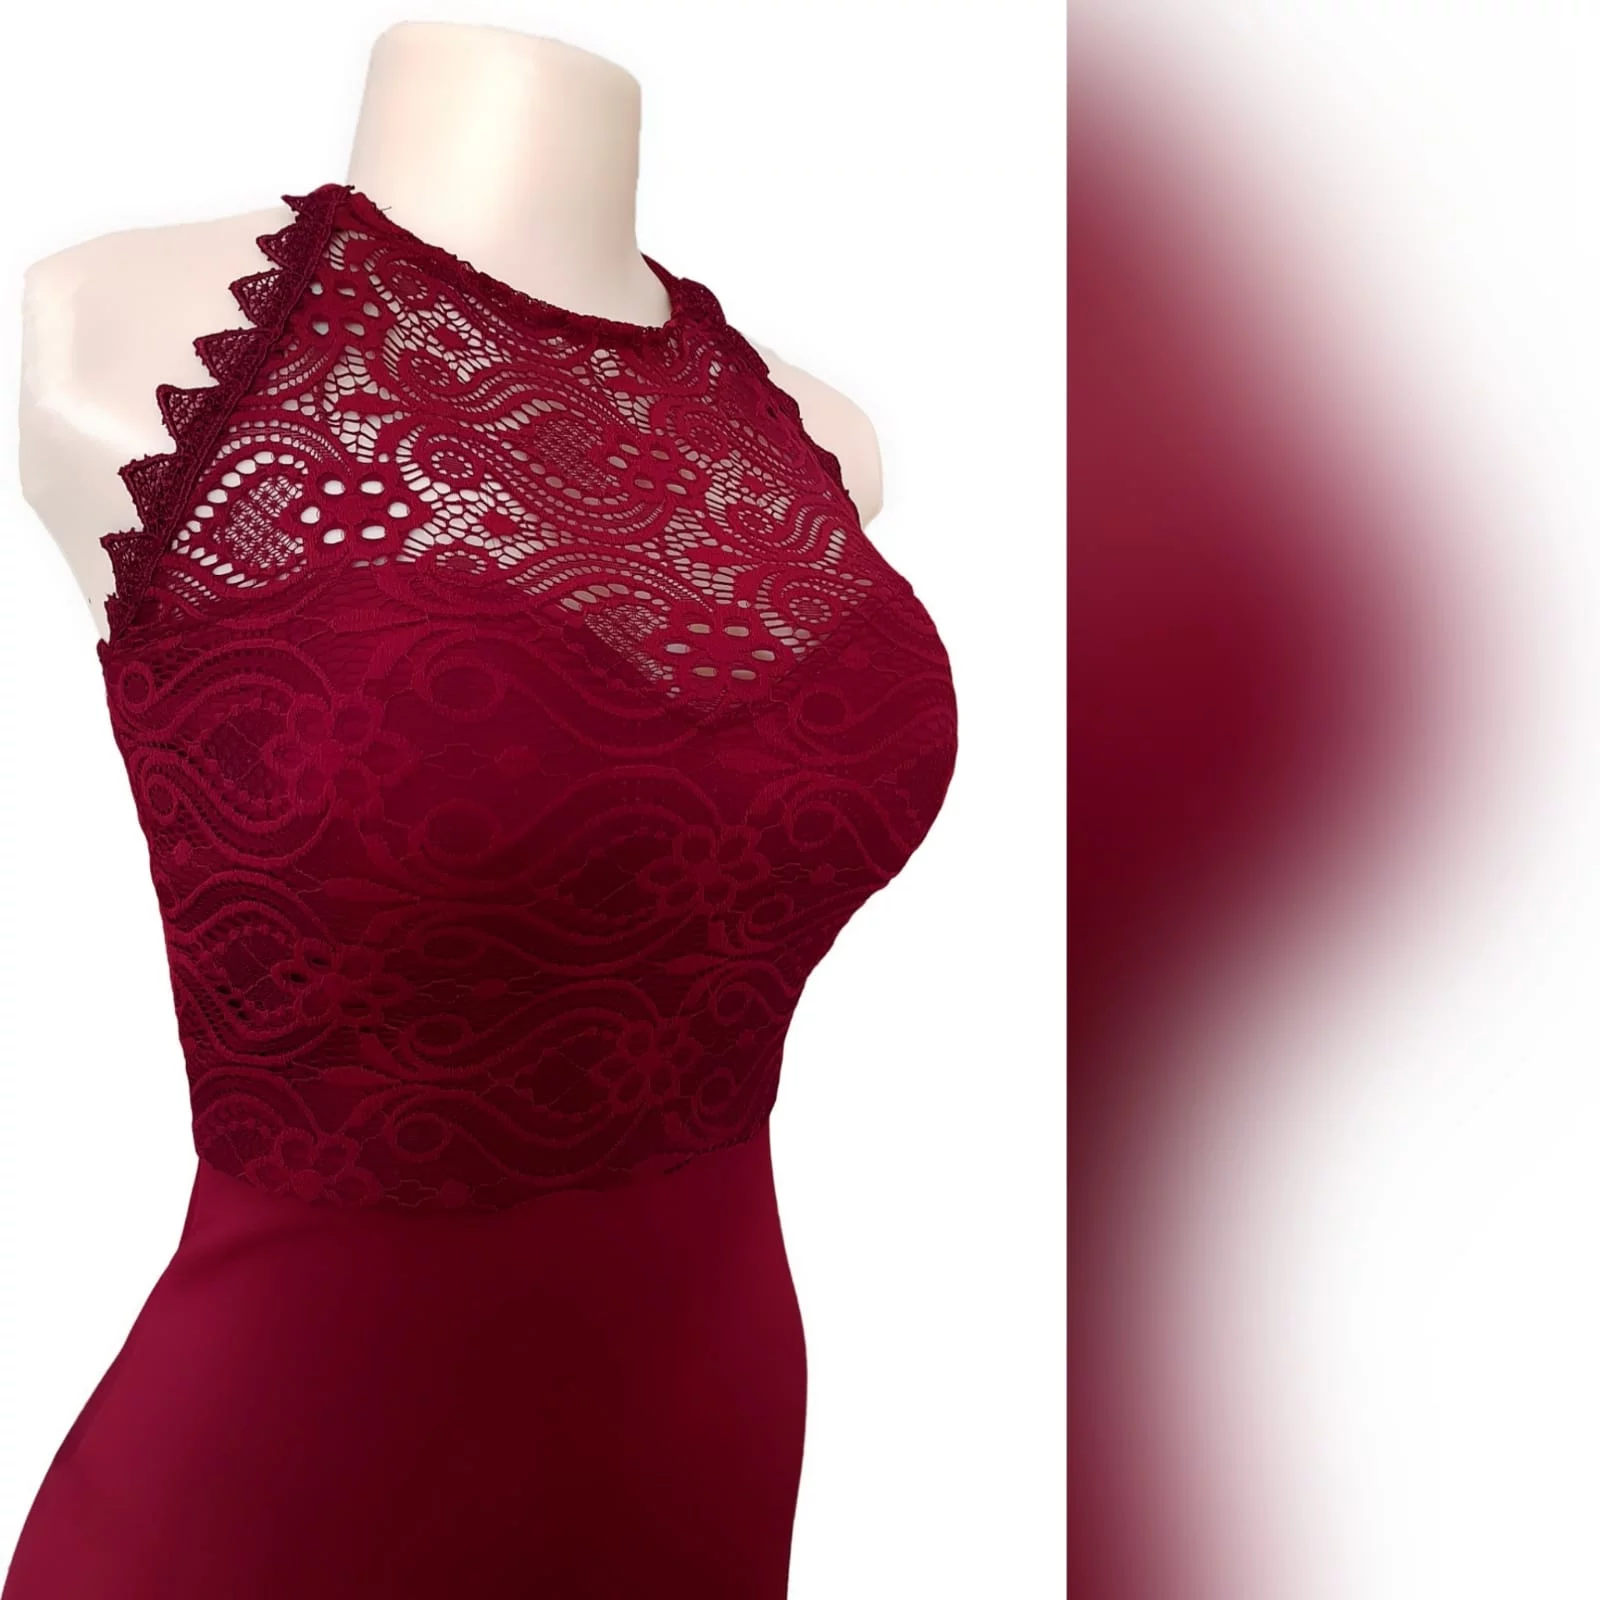 Burgundy soft mermaid gorgeous evening dress 15 this gorgeous evening dress was created for my client in south africa to celebrate her special occasion. A burgundy soft mermaid prom dress with a lace bodice, a sheer lace neckline and dramatic train.